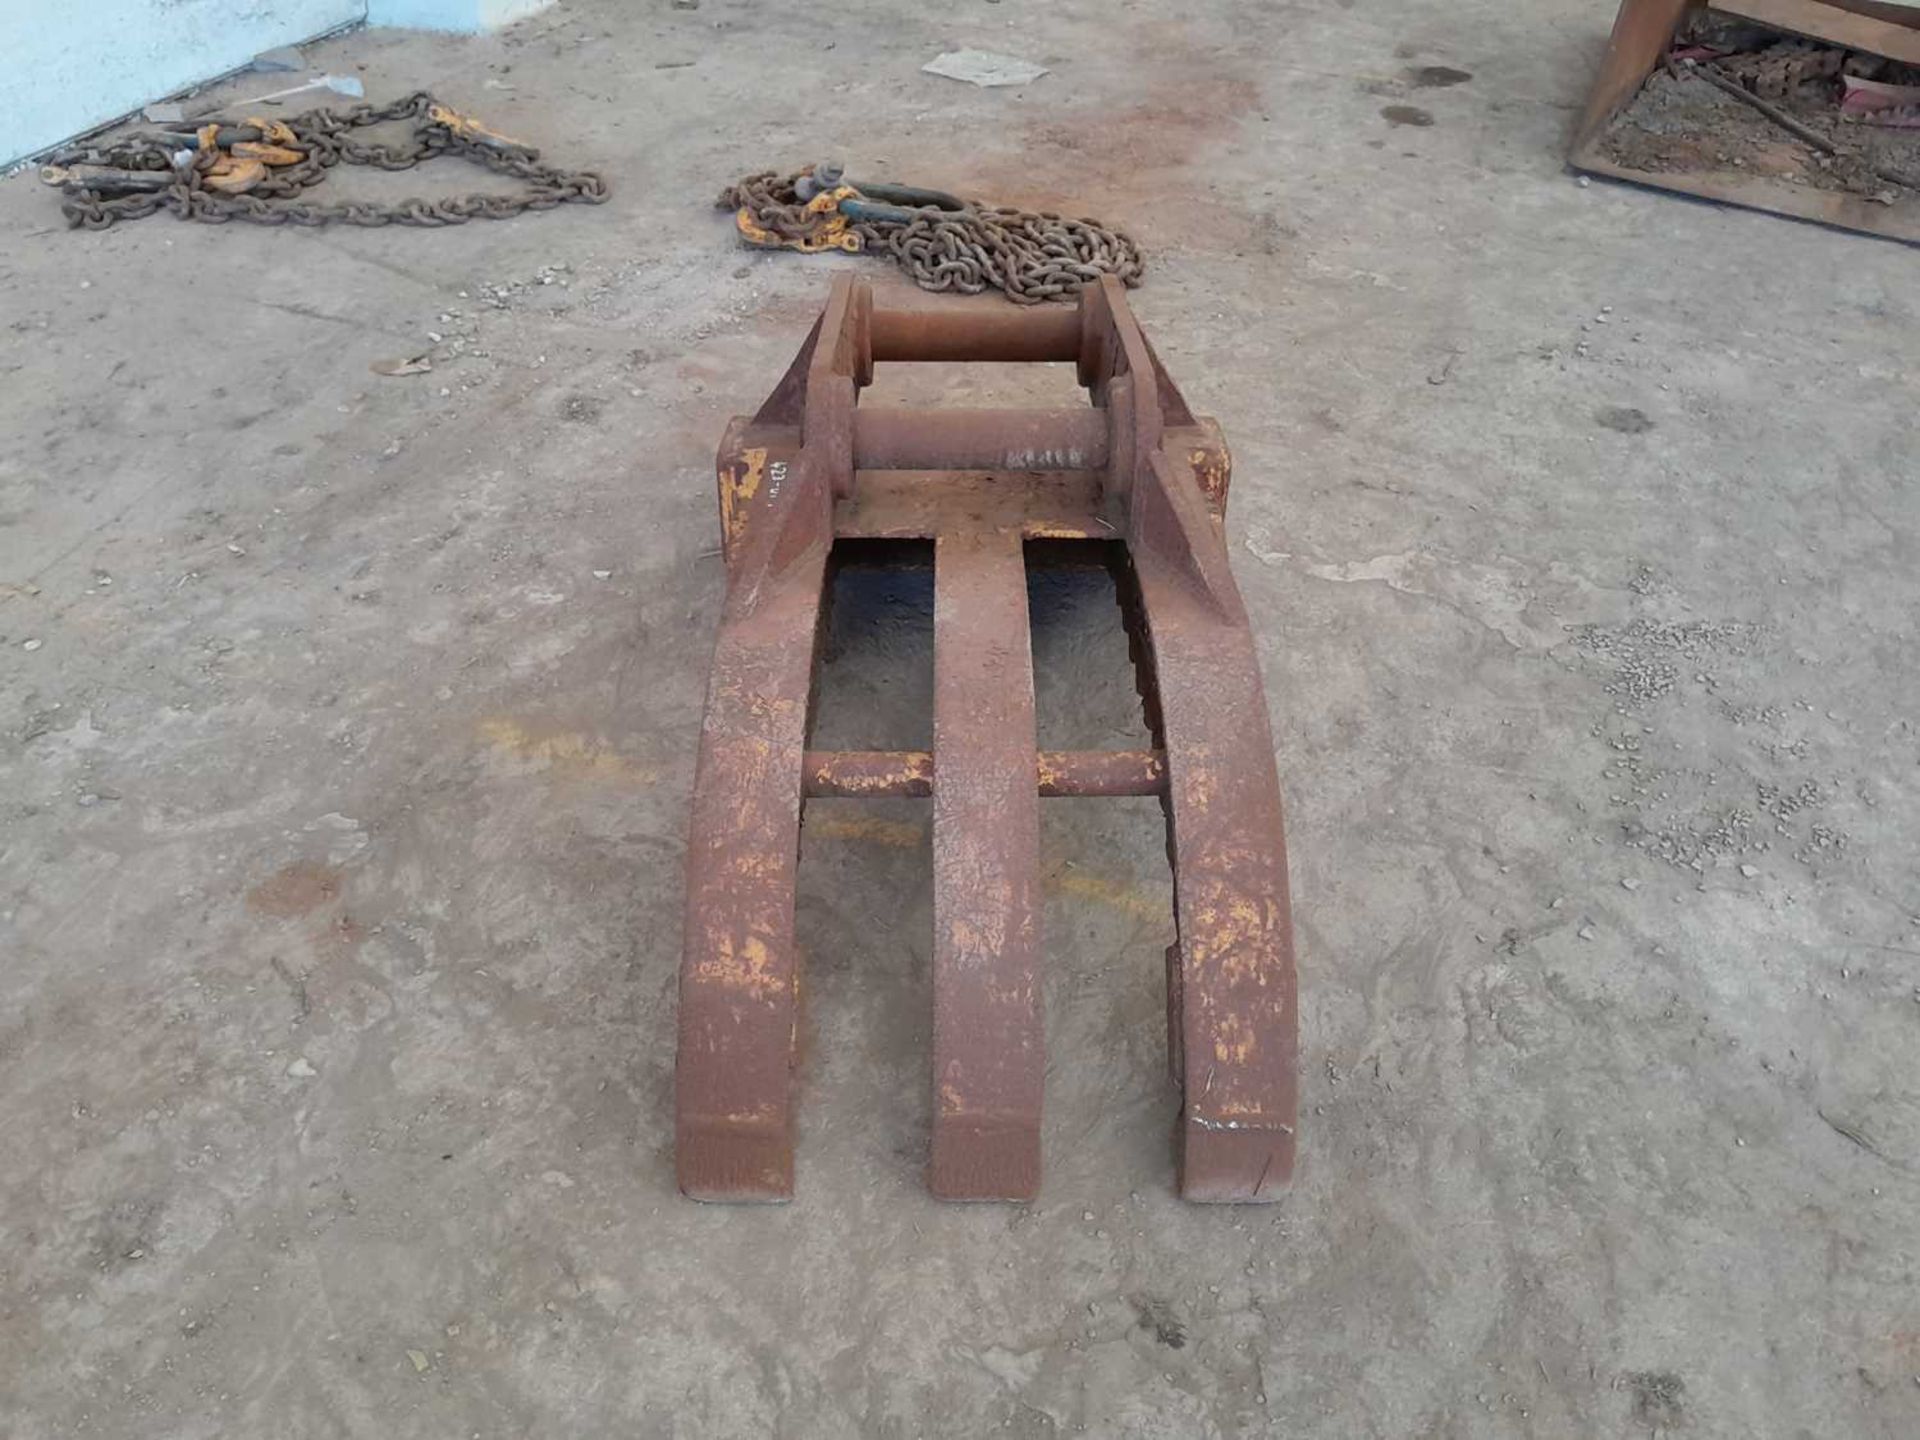 24" 3 Finger Grab 70mm Pin to suit 14-16 Ton Excavator (Pin Centres 48cm, Dipper Width 31cm) - Image 5 of 6